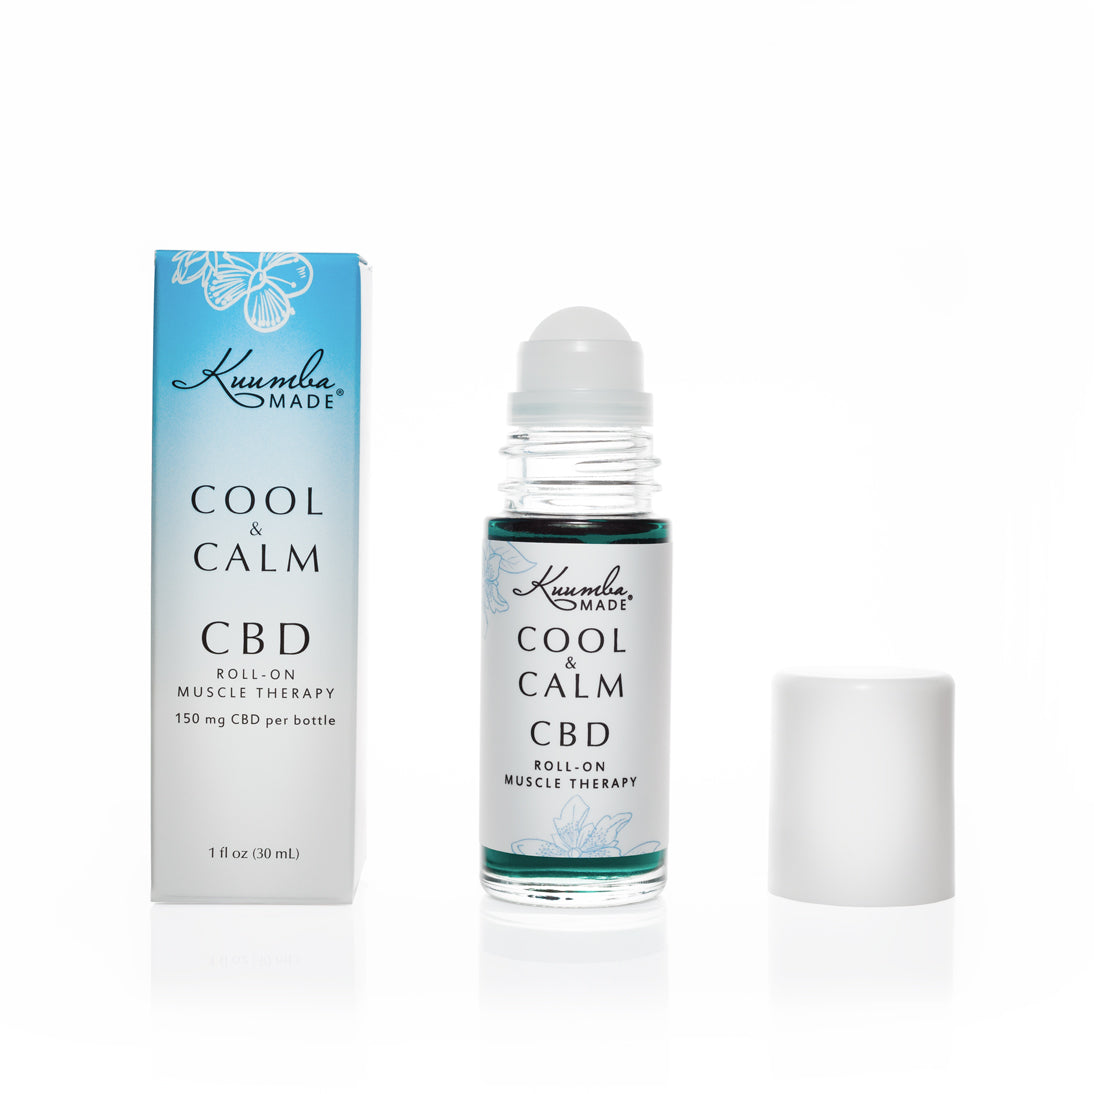 COOL & CALM- Natural CBD 30ml Roll-On from Kuumba Made